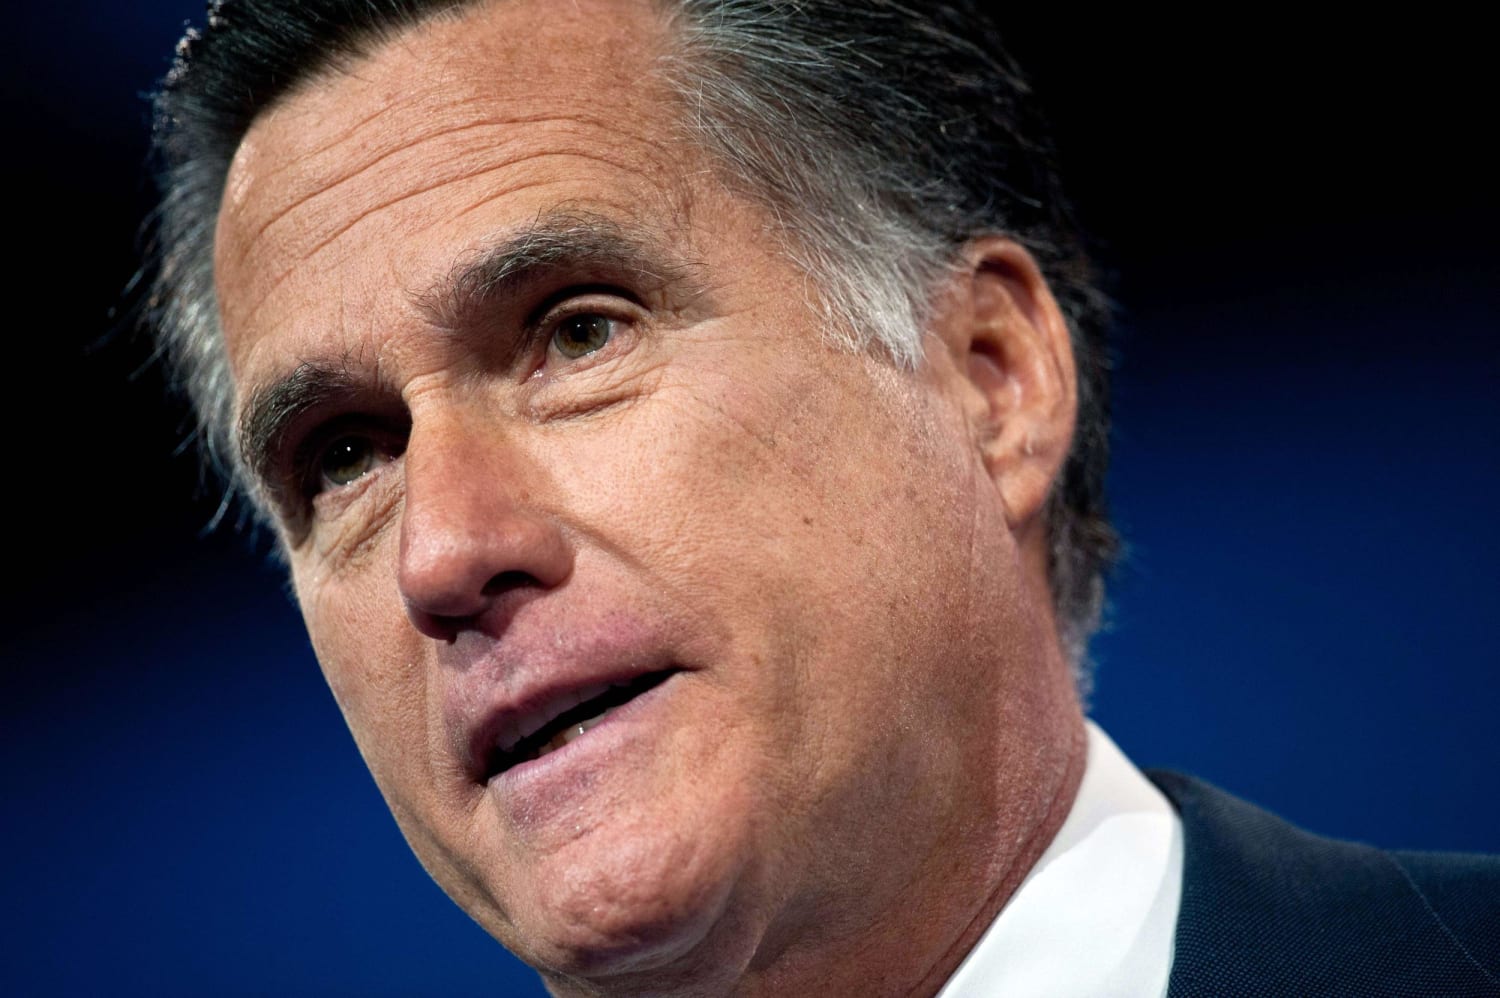 Should @MittRomney run for president? He has made a decision about.